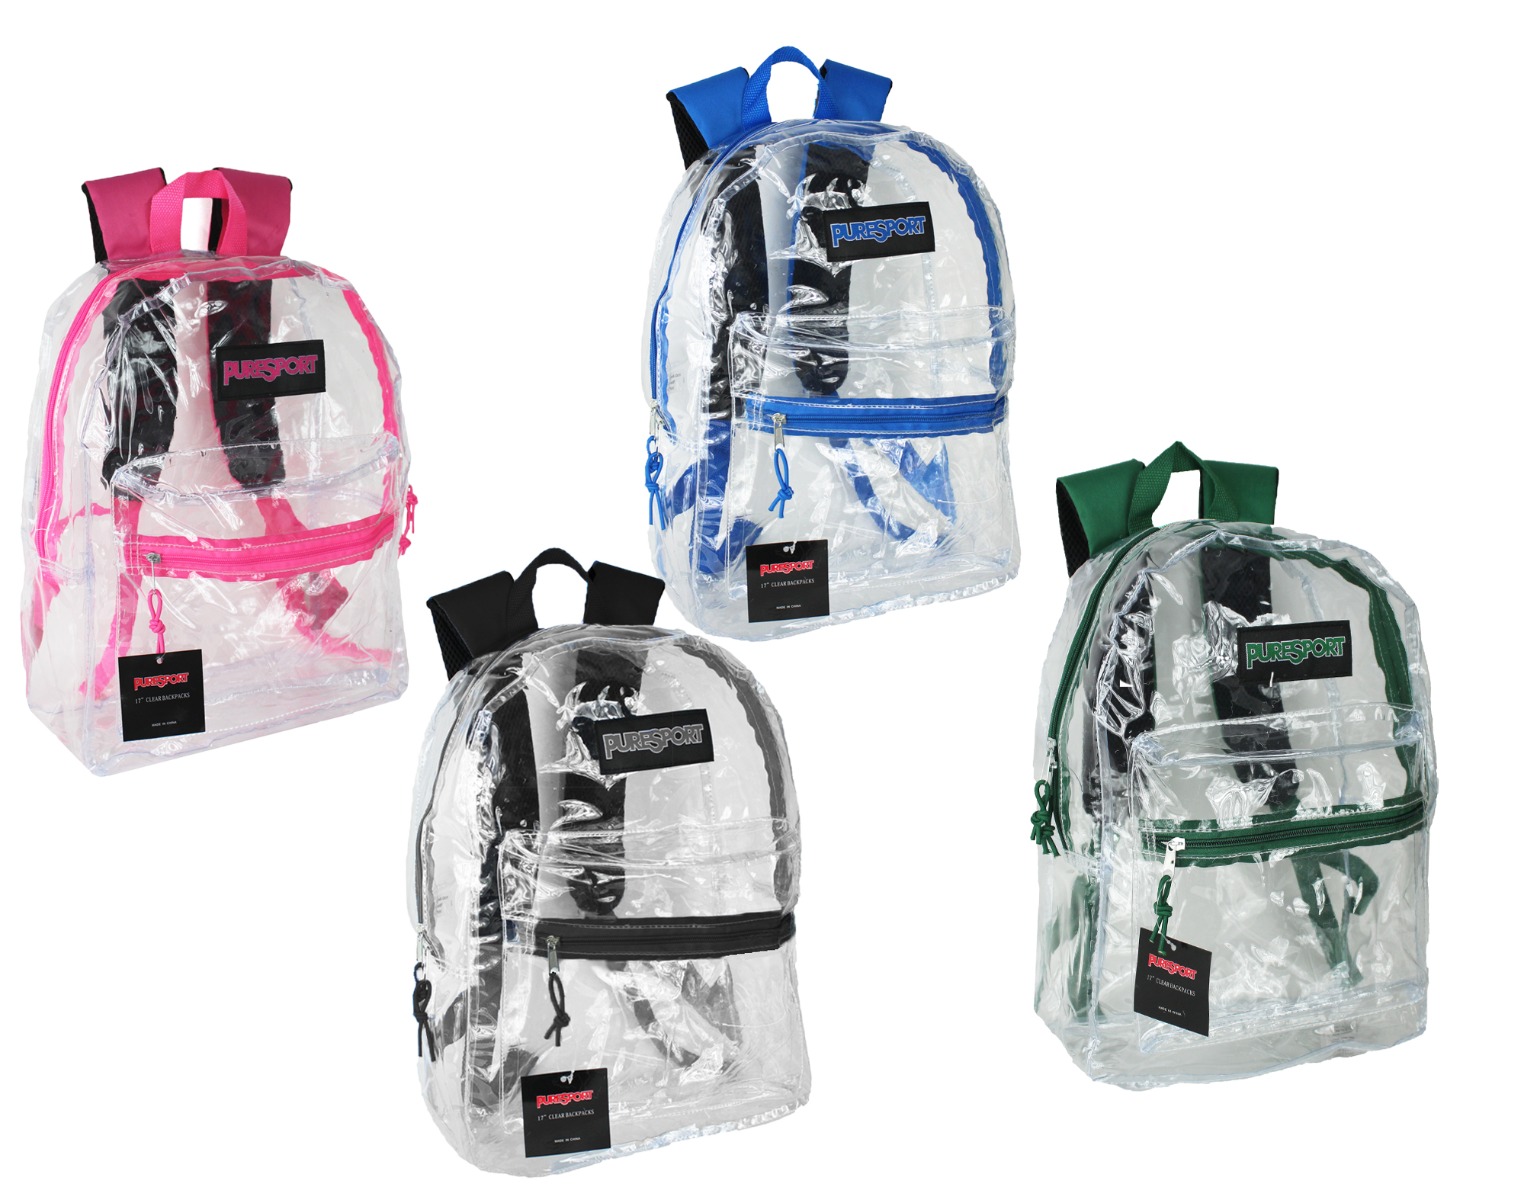 ''17'''' Classic Clear PureSport Backpacks w/ Front Zipper Pocket - Assorted Colors''